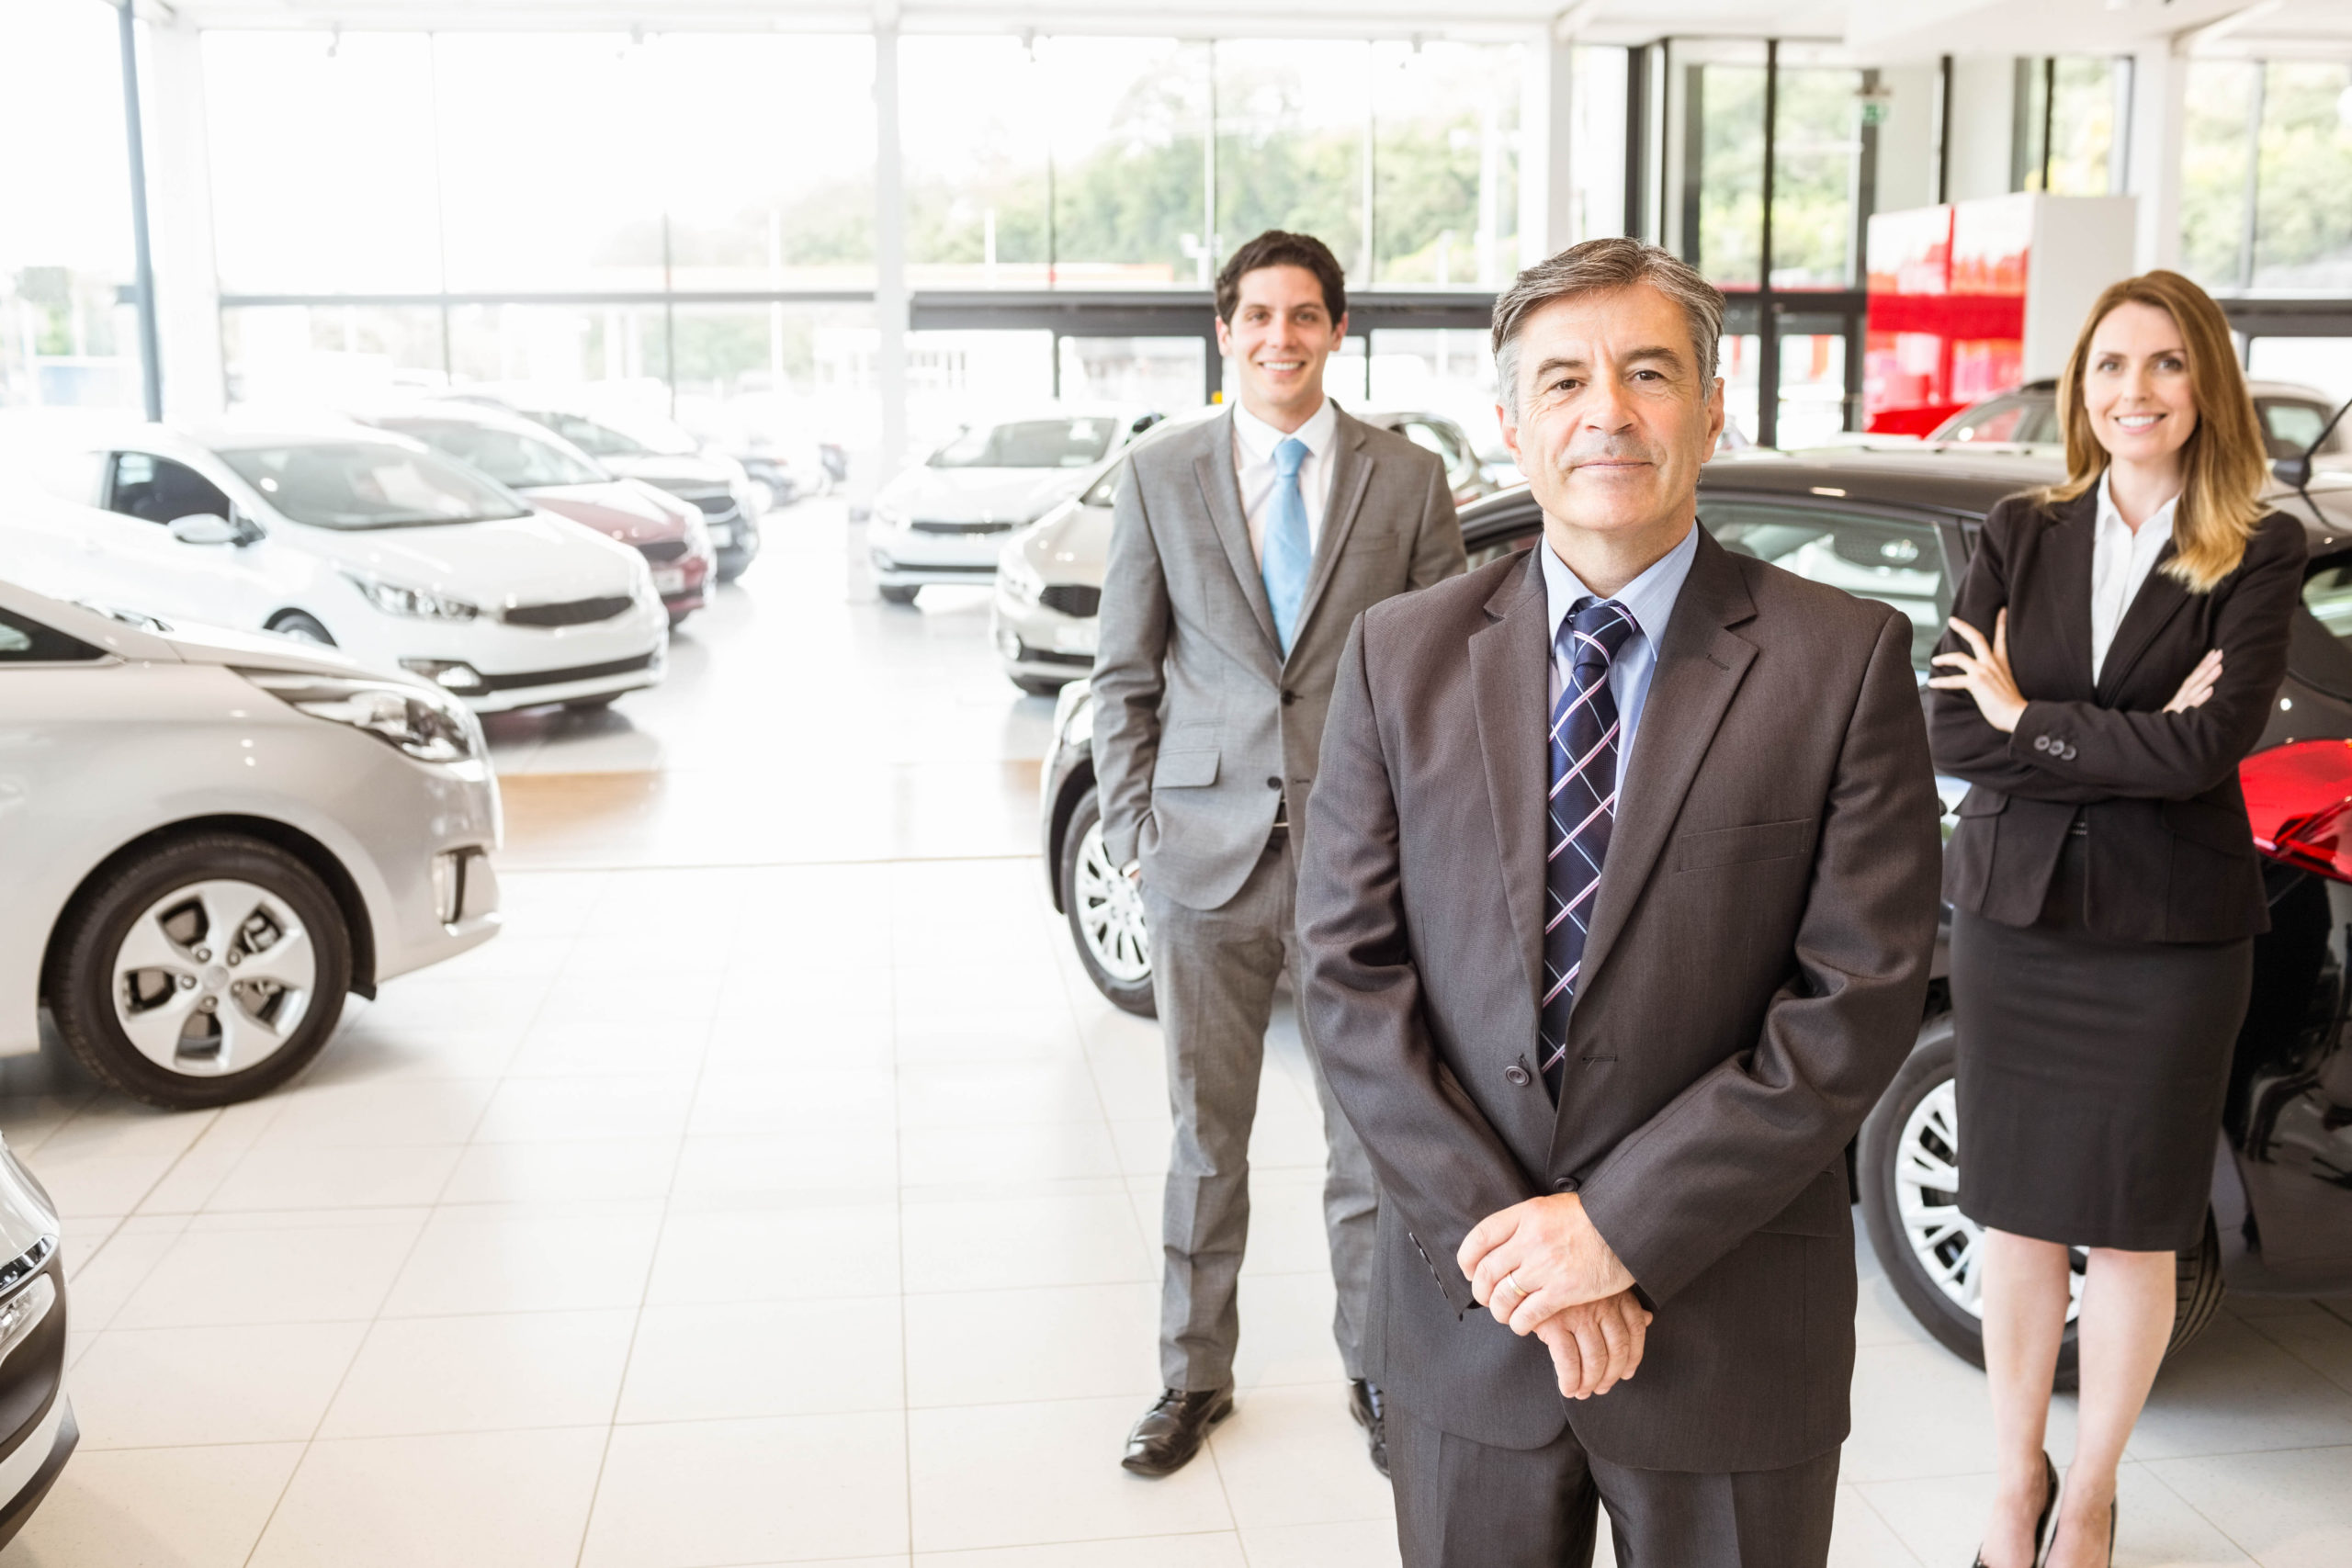 Three Approaches To Dealership Marketing - Autopeople Automotive Recruiting